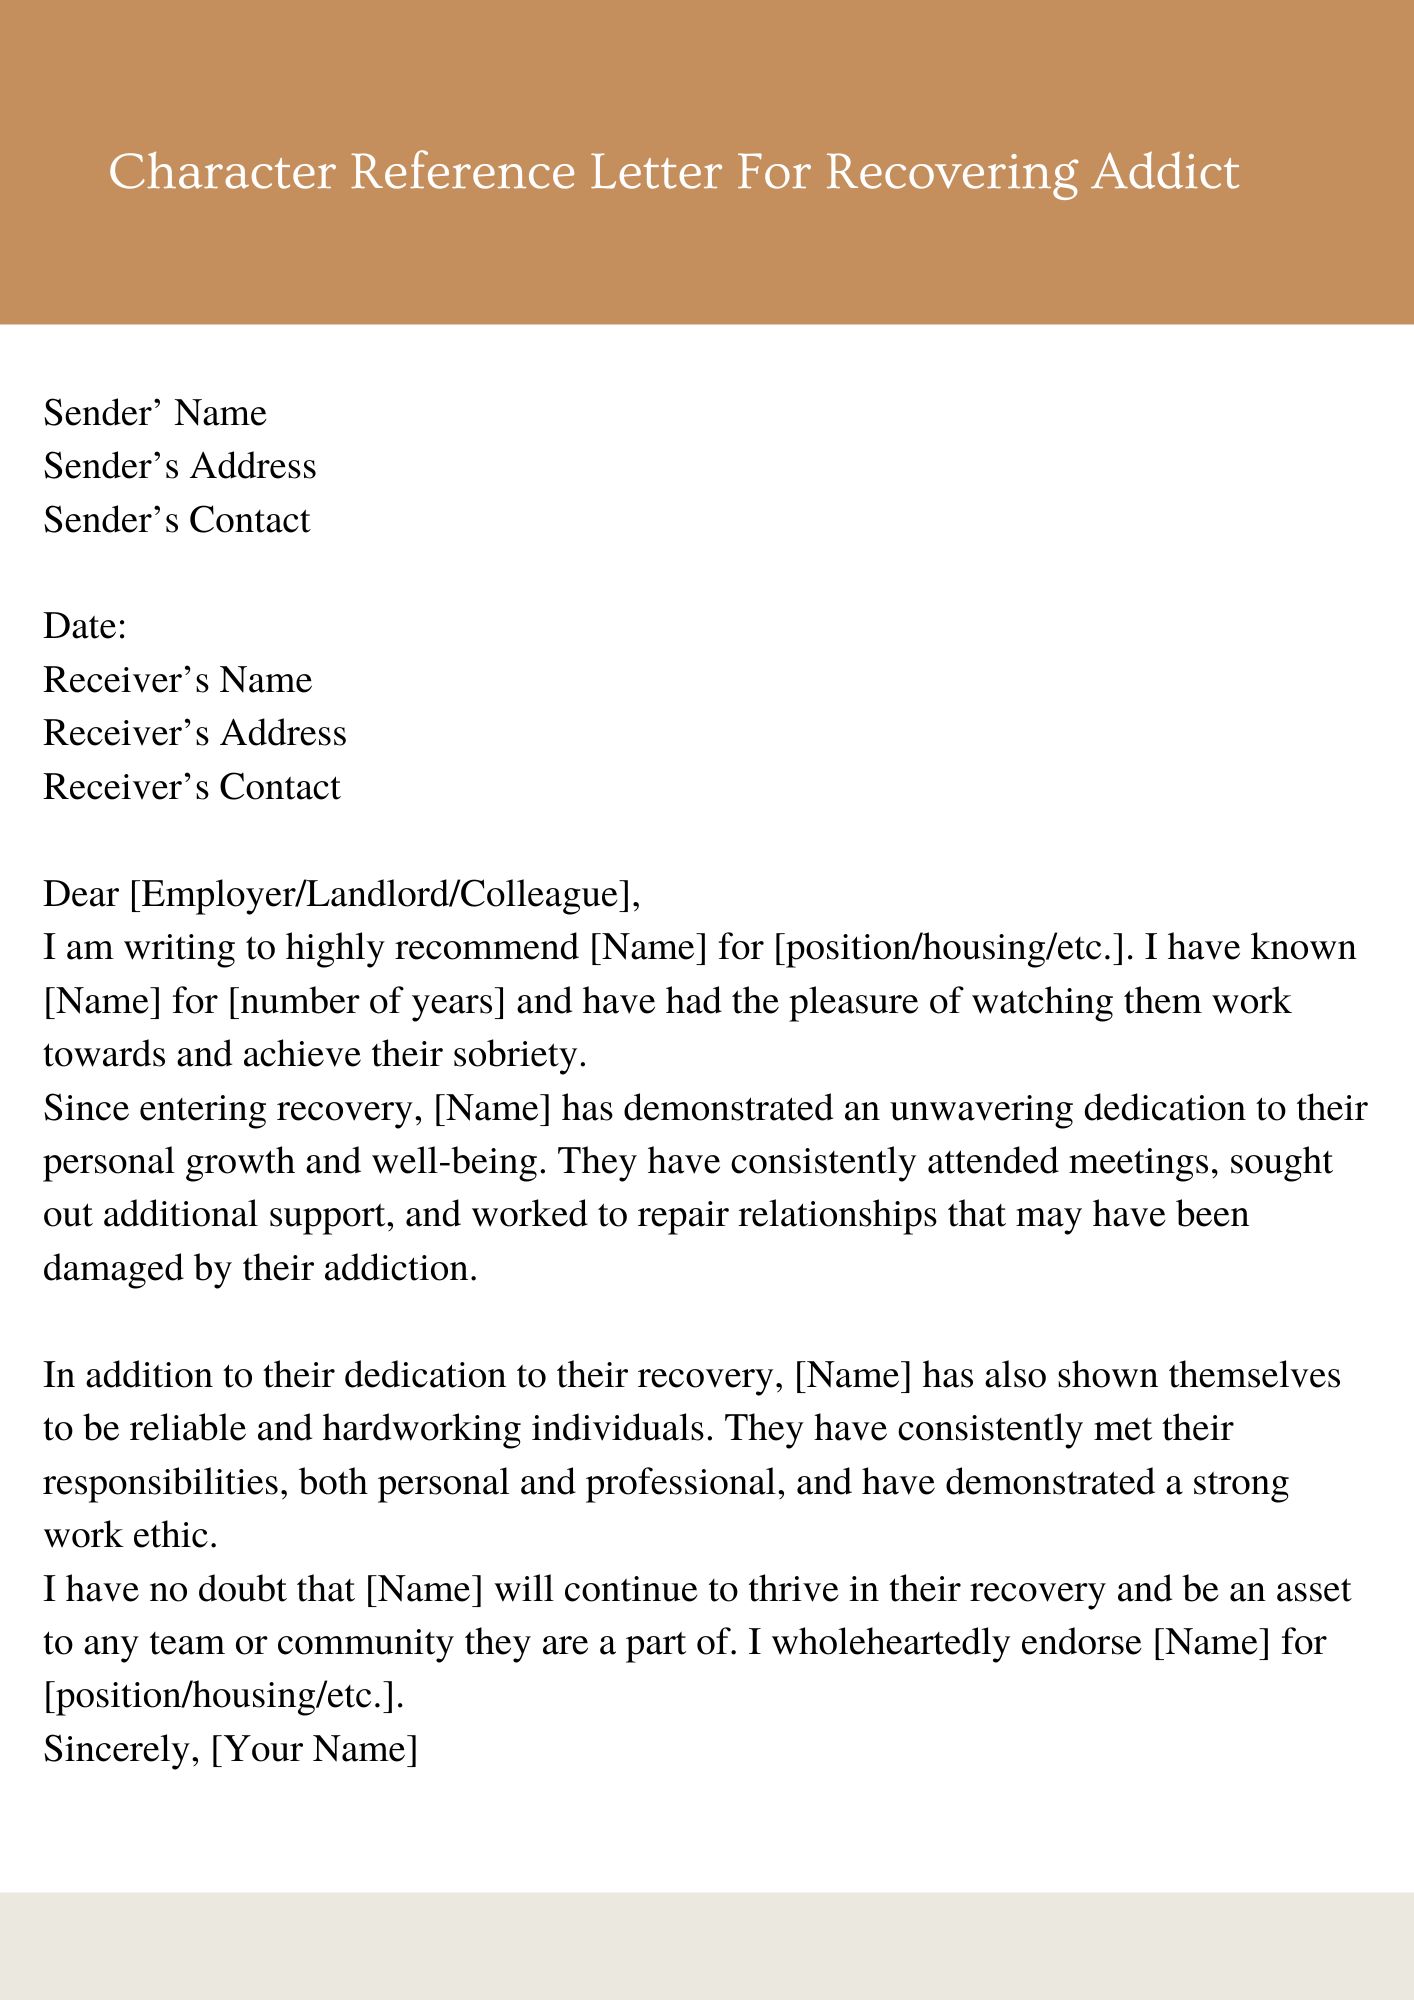 Character Reference Letter For Recovering Addict 